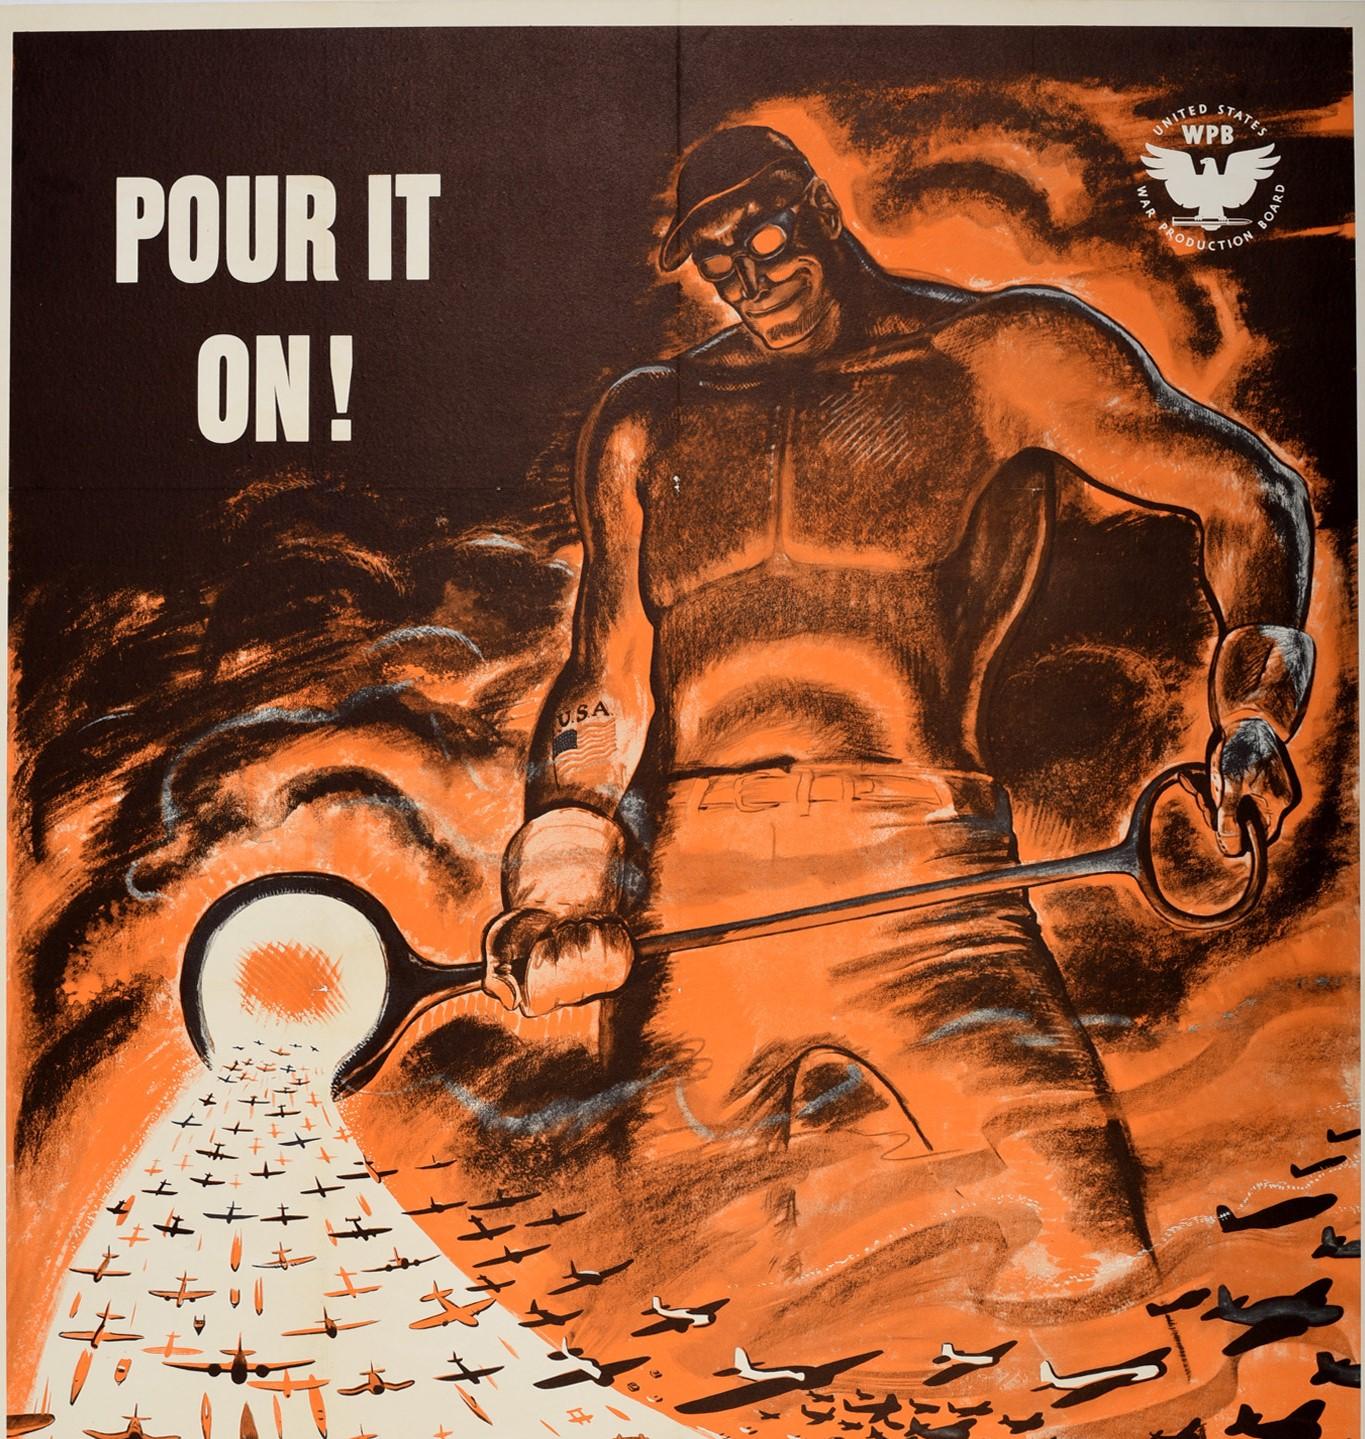 Original vintage World War Two propaganda poster - Pour it on! - featuring a dynamic industrial design by William Garrett Price (1896-1979) depicting a muscular metal worker with a USA flag tattoo showing above his glove on his right arm standing in